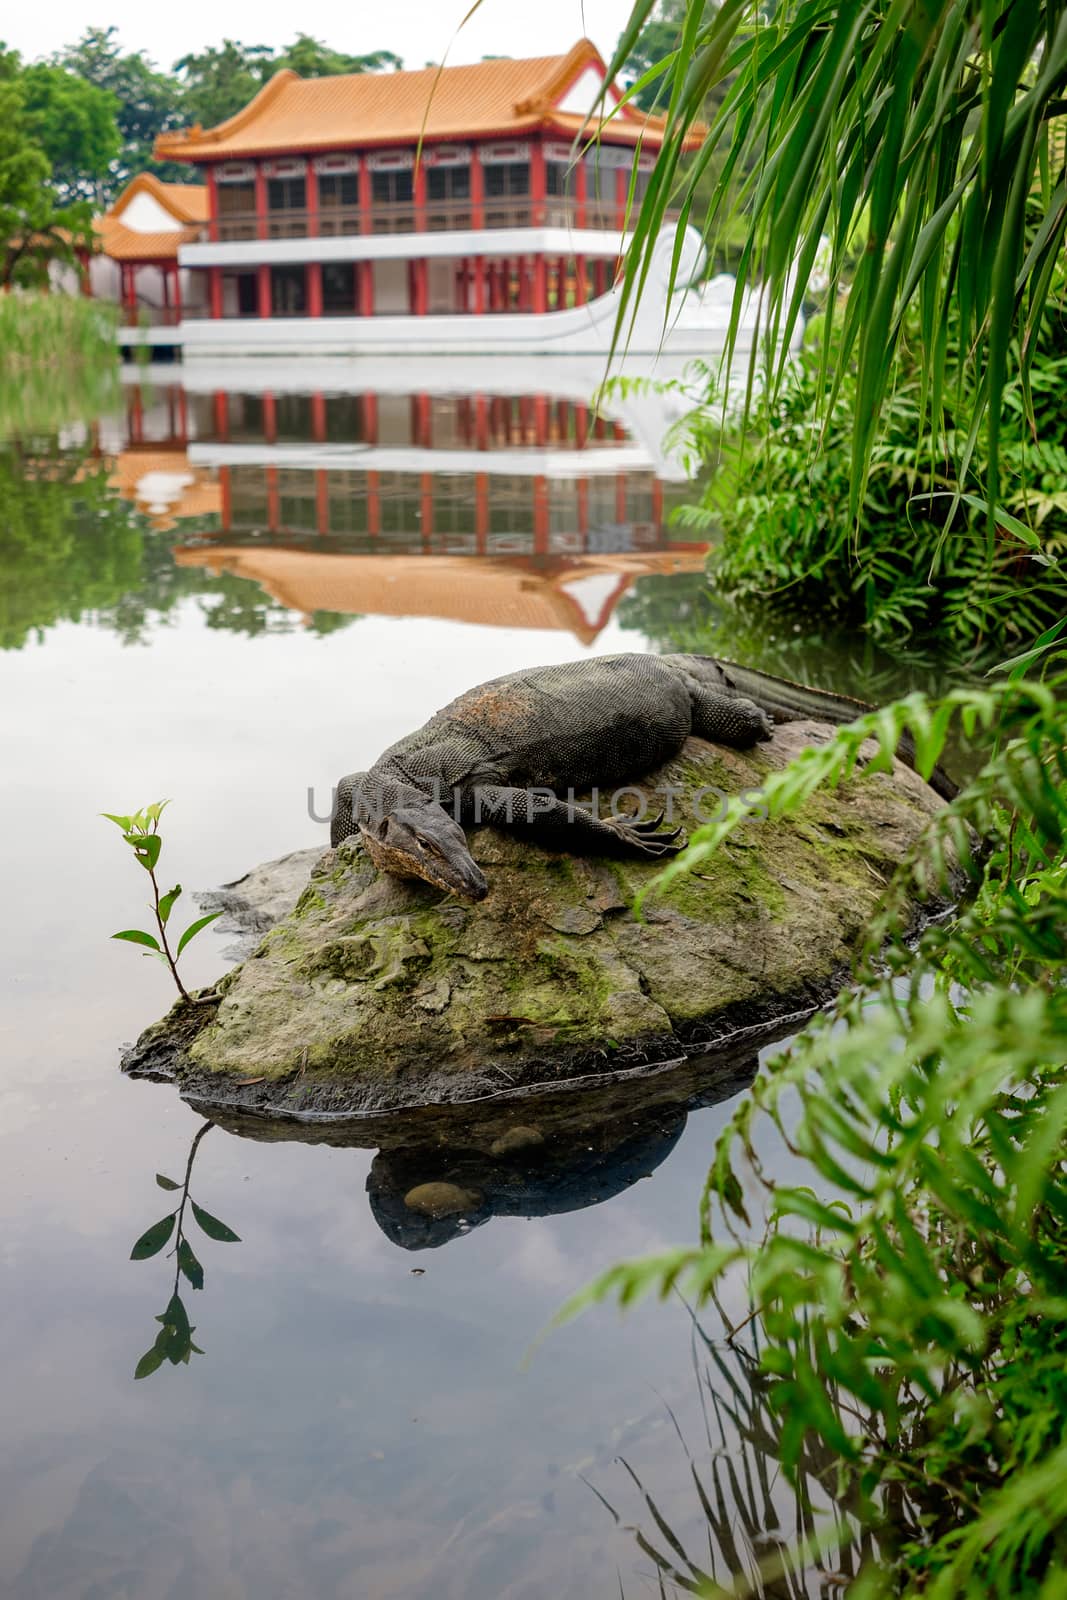 Water monitor lizard (varan) is restin on the stone in the pond  by rainfallsup